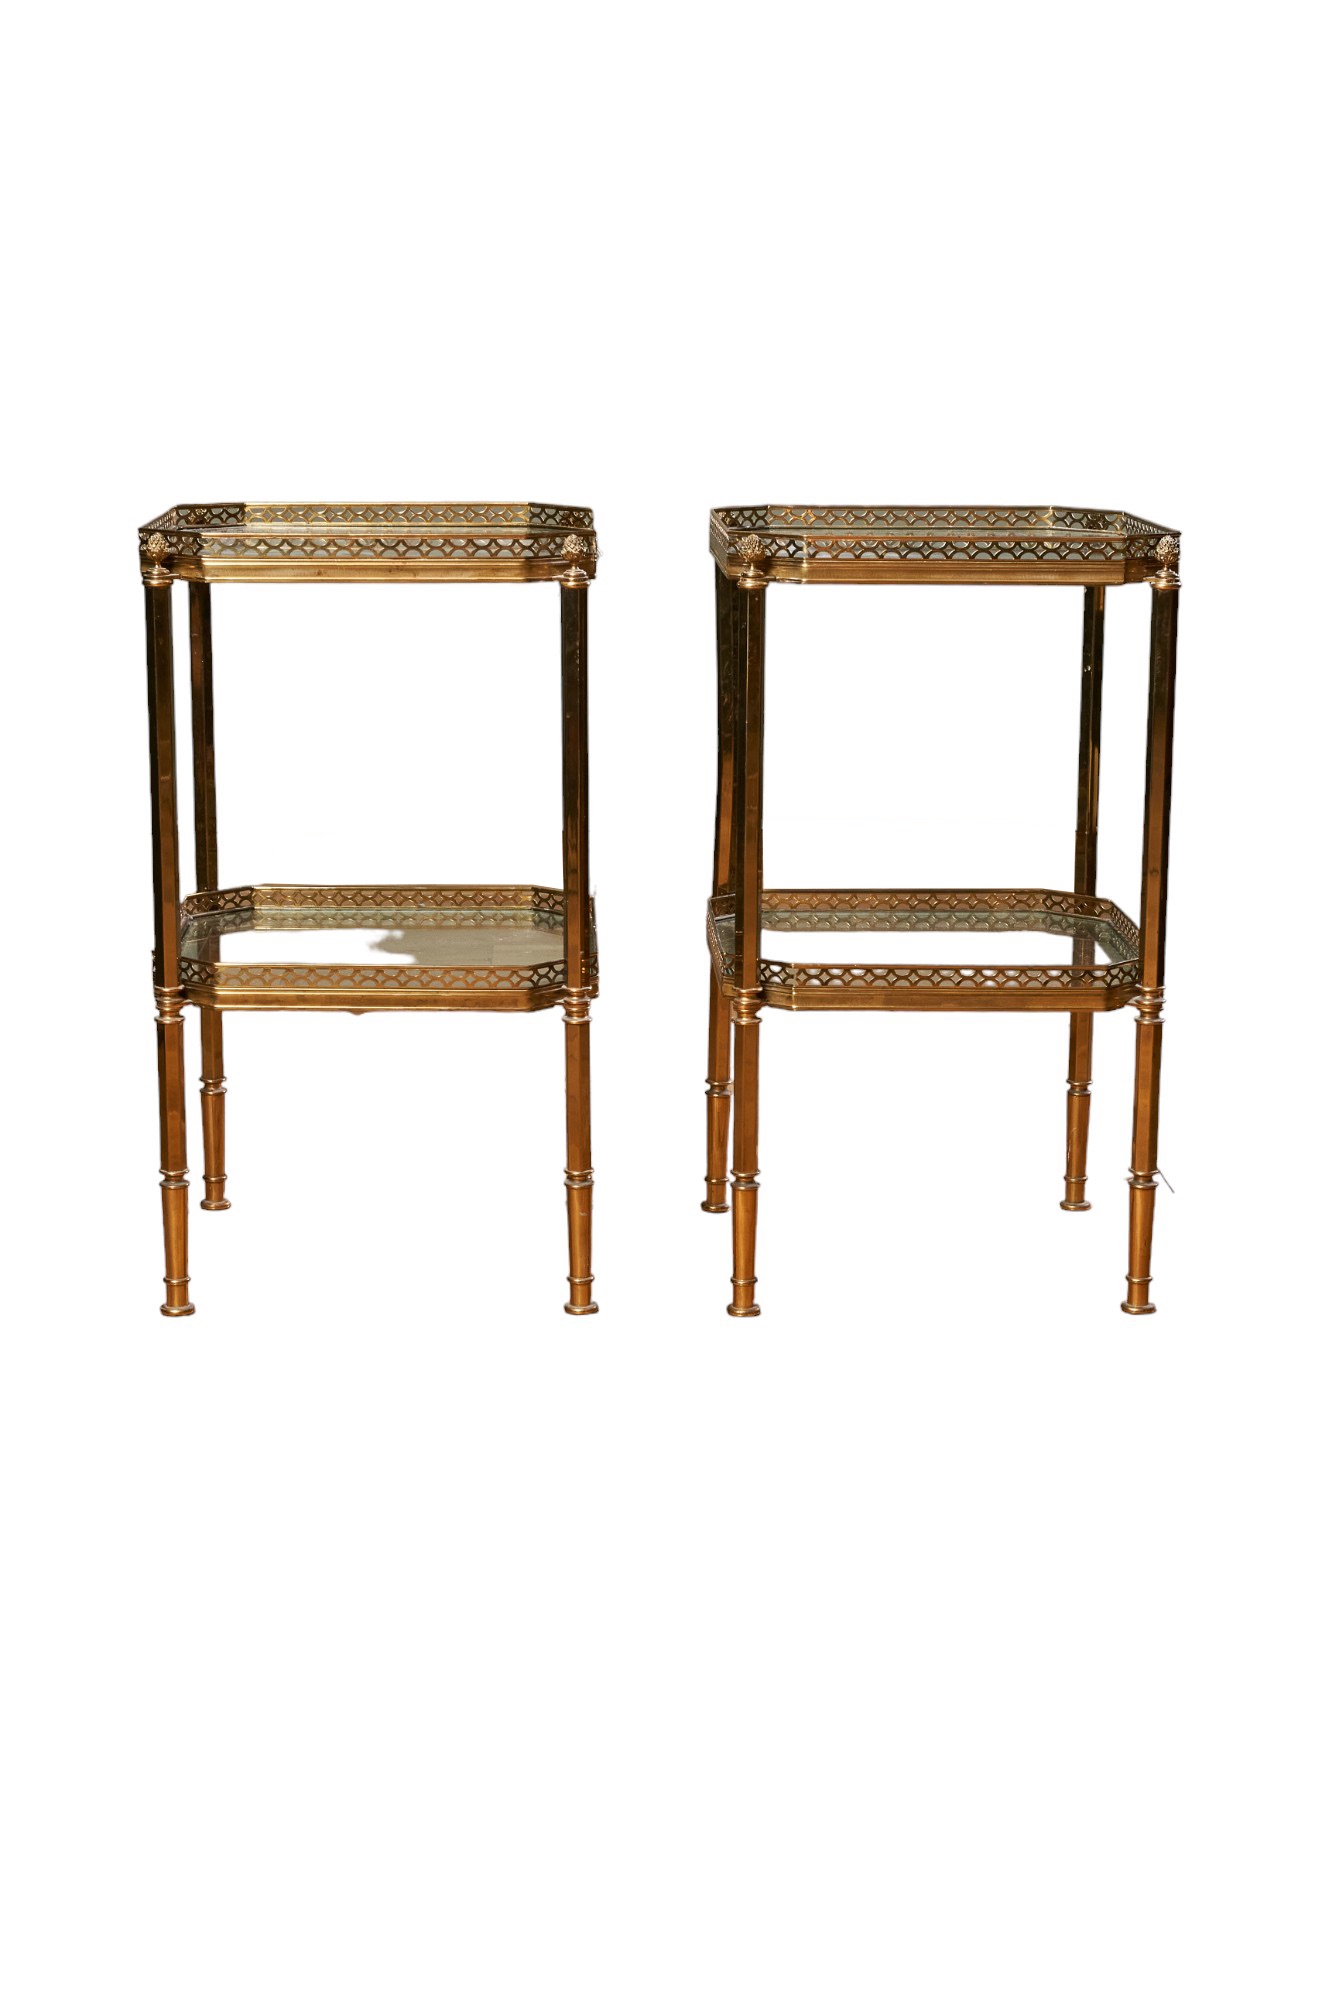 20th Century, A pair of brass and glass side tables